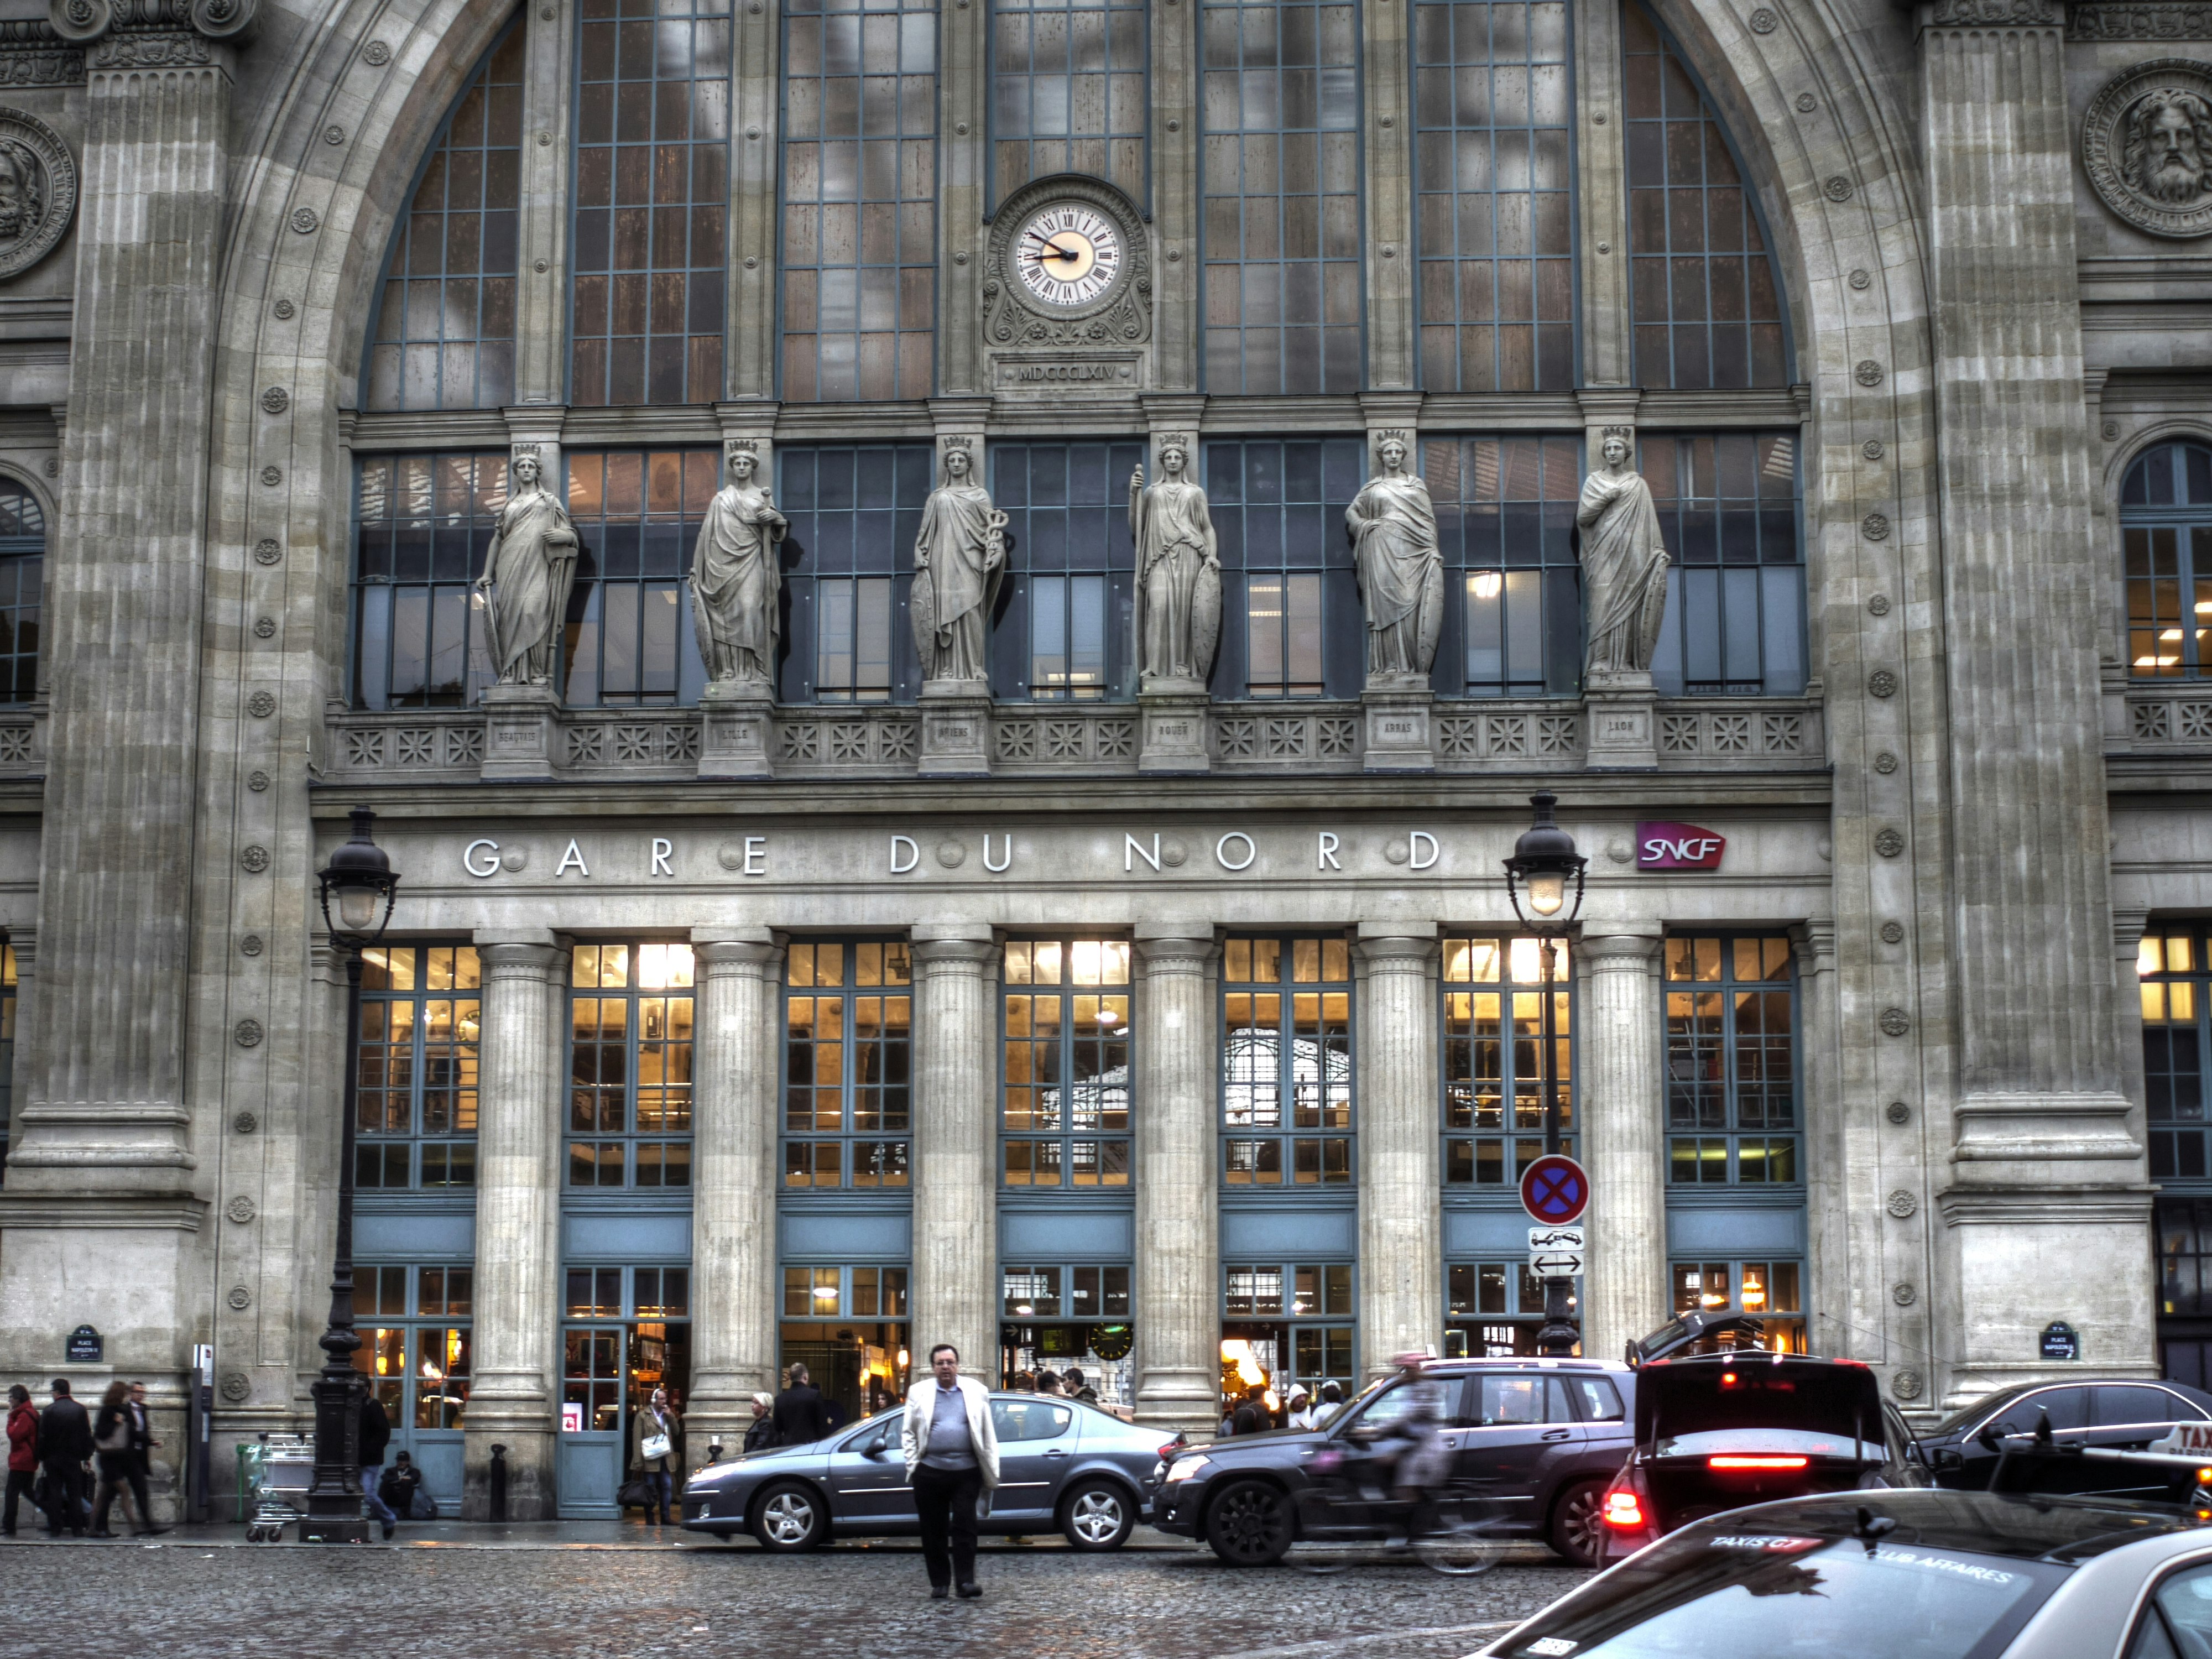 Main entrance of the Gare du Nord in Paris with HDR effect.